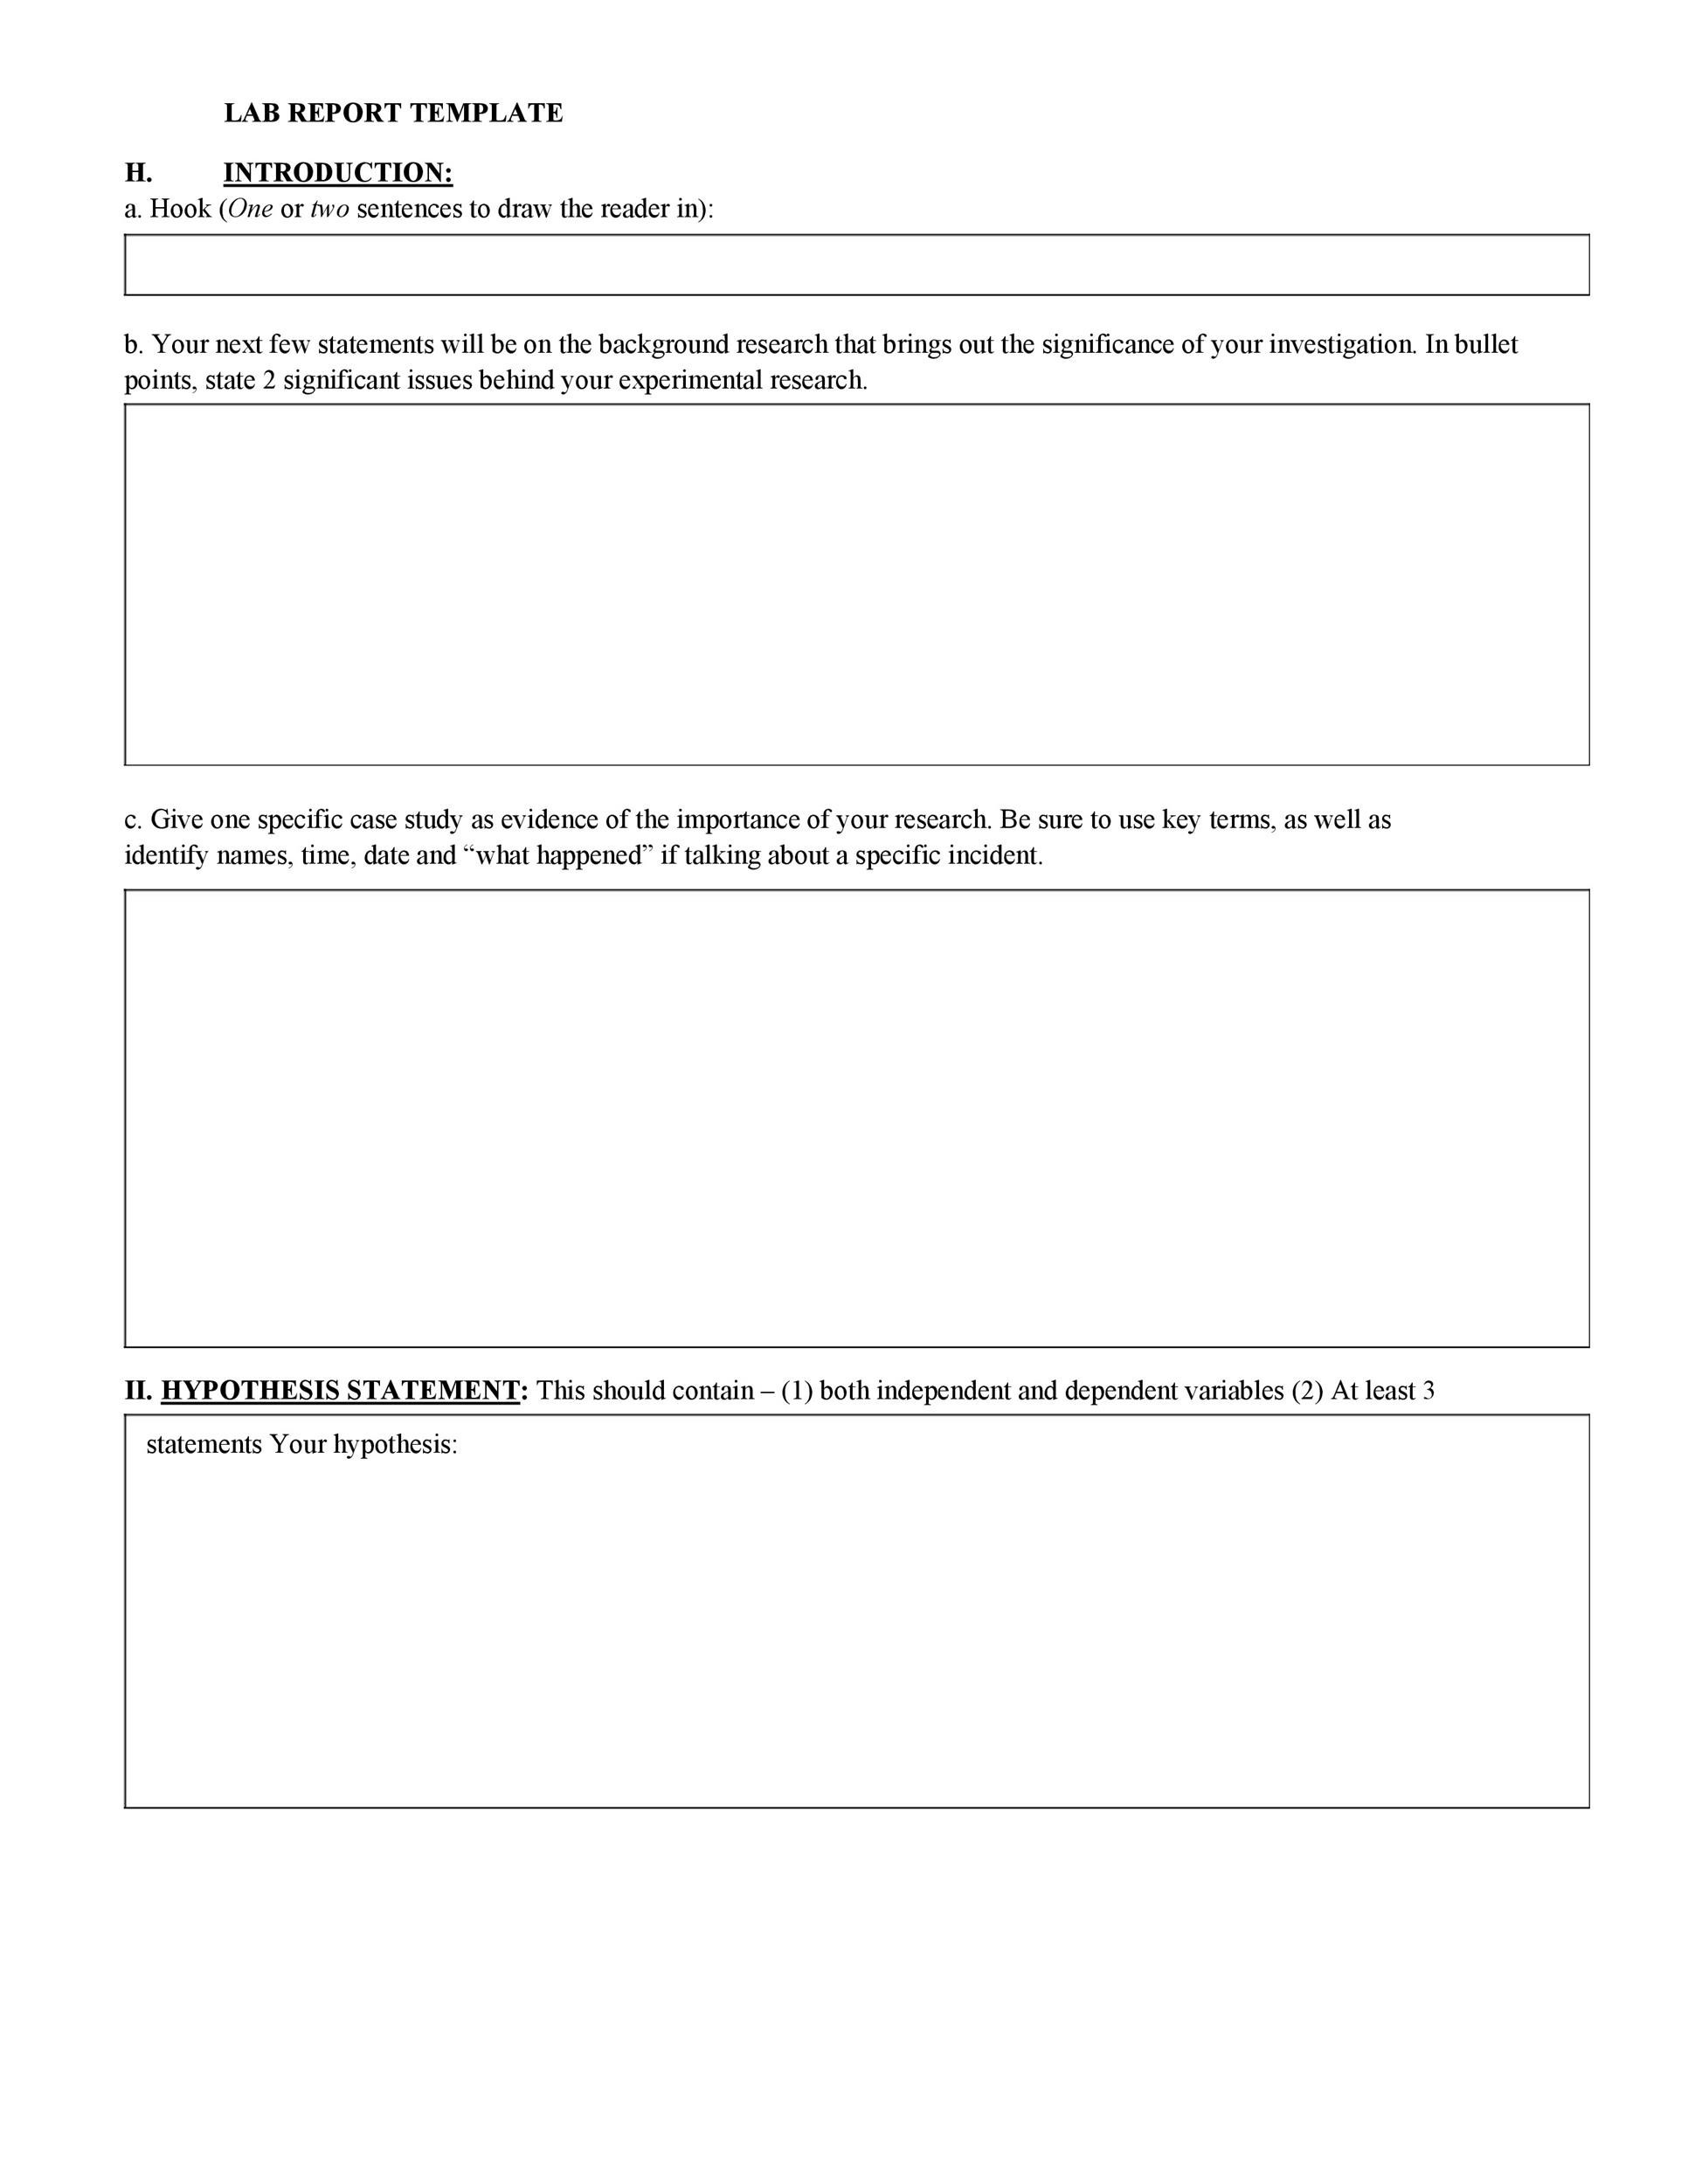 Free lab report template 20